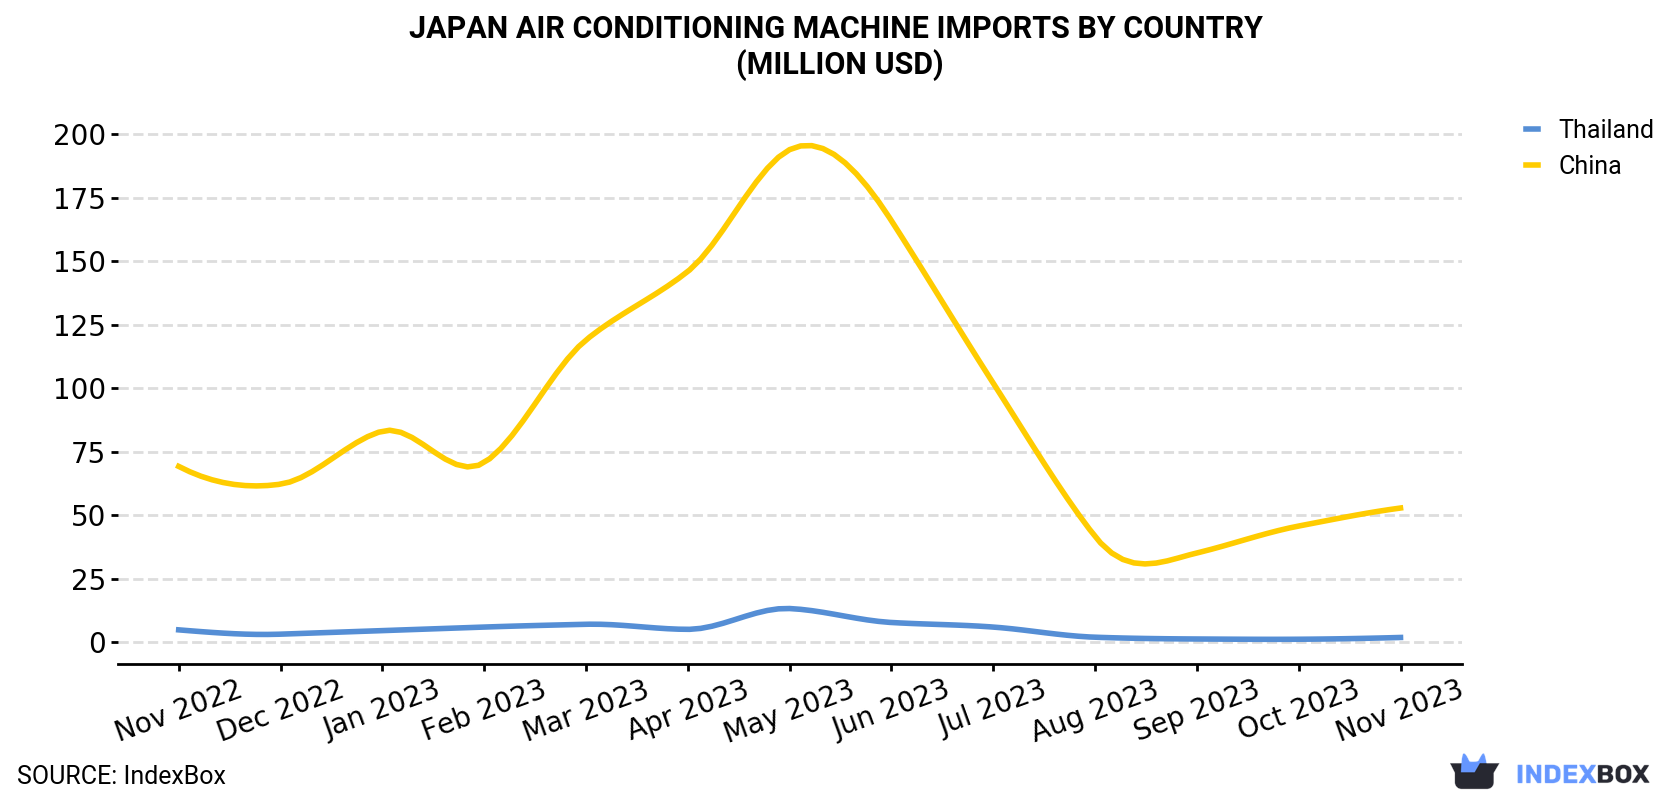 Japan Air Conditioning Machine Imports By Country (Million USD)